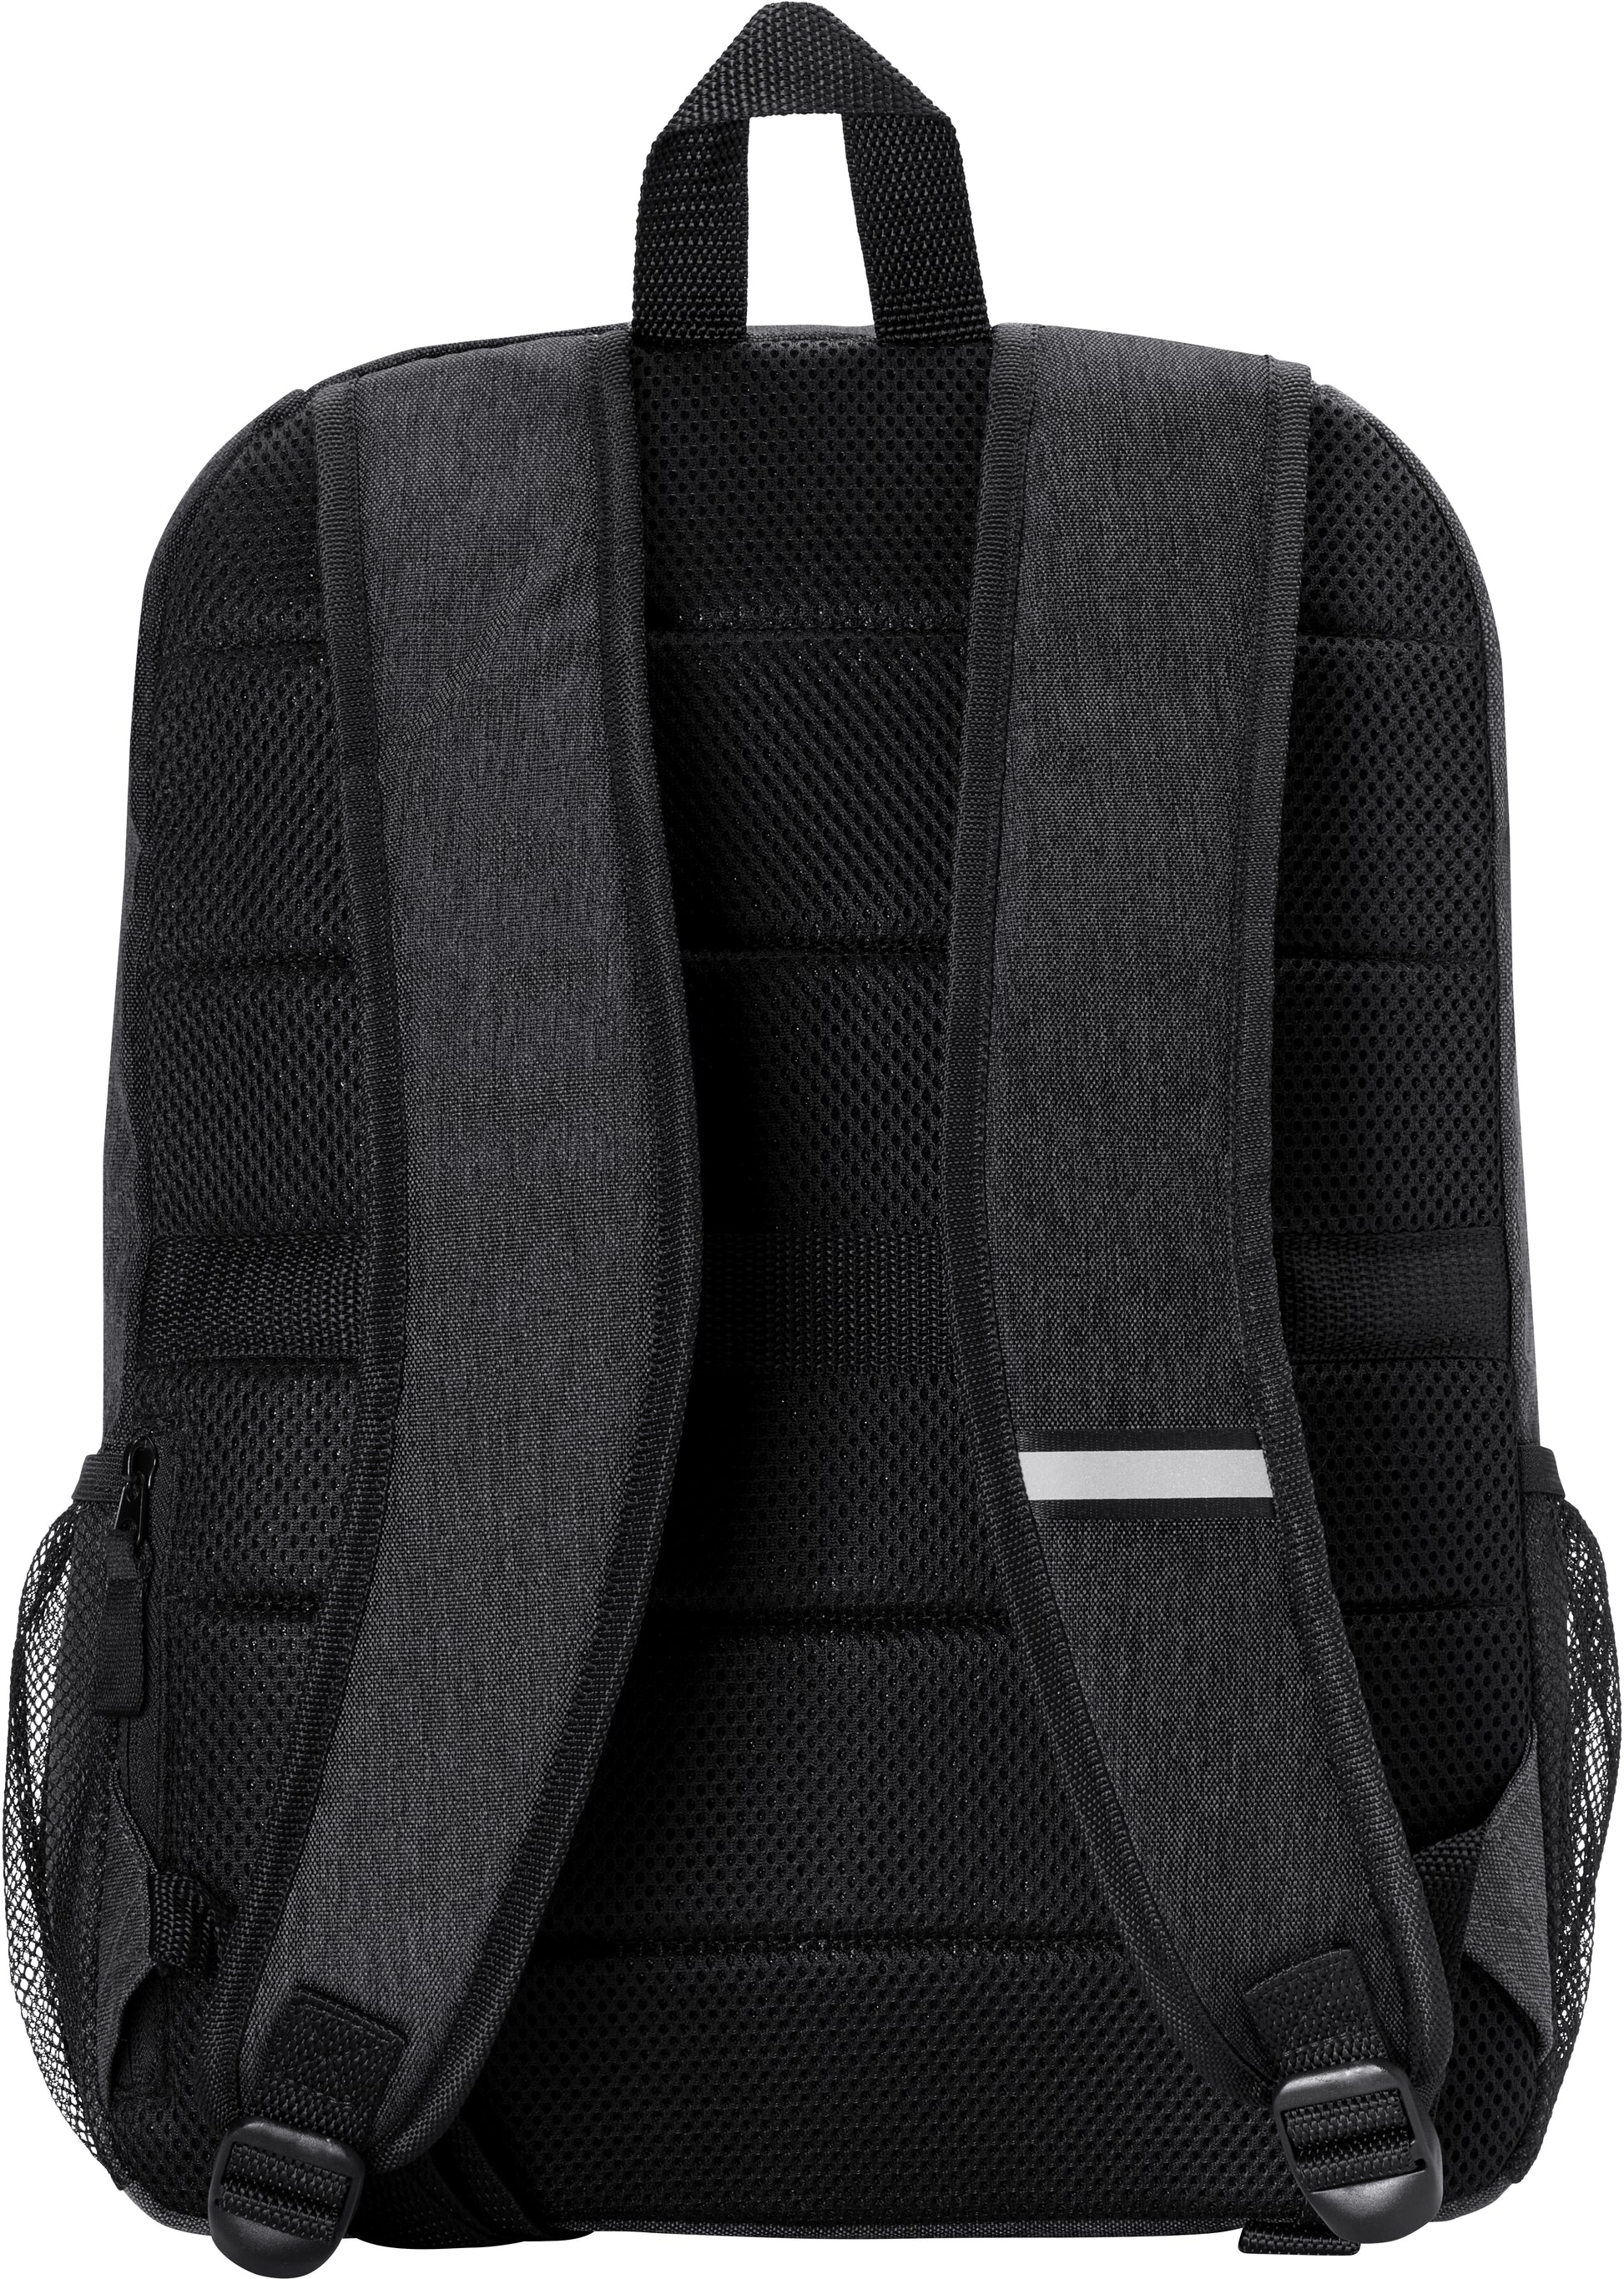 HP Prelude Pro 15.6-inch Recycled Backpack-3